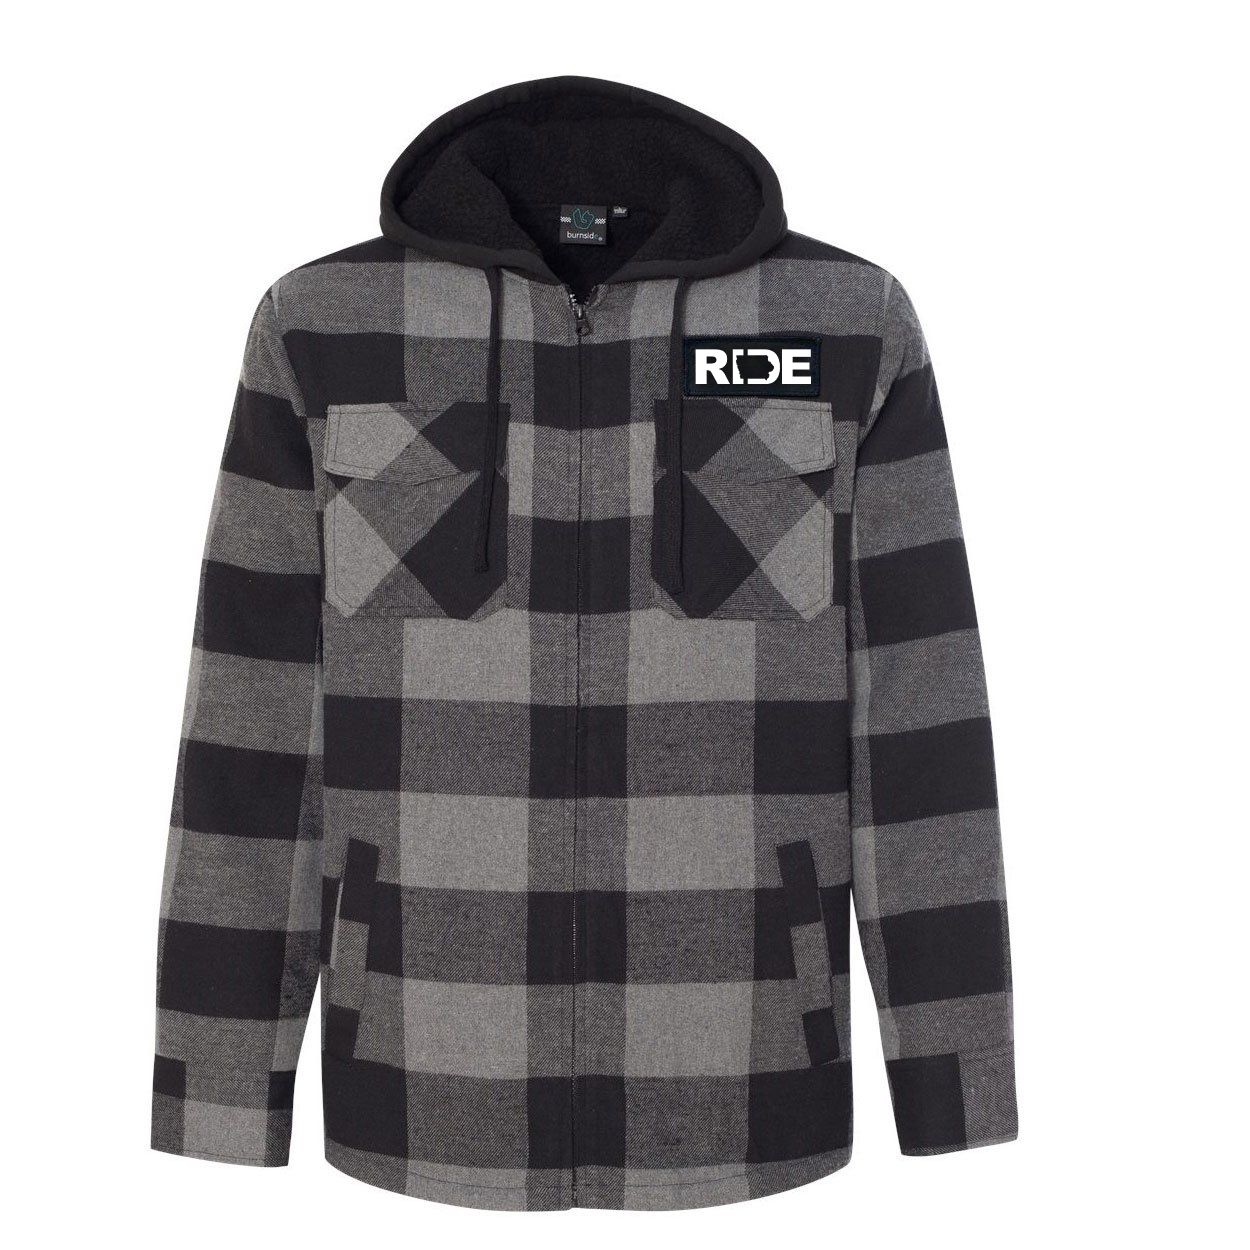 Ride Iowa Classic Unisex Full Zip Woven Patch Hooded Flannel Jacket Black/Gray (White Logo)